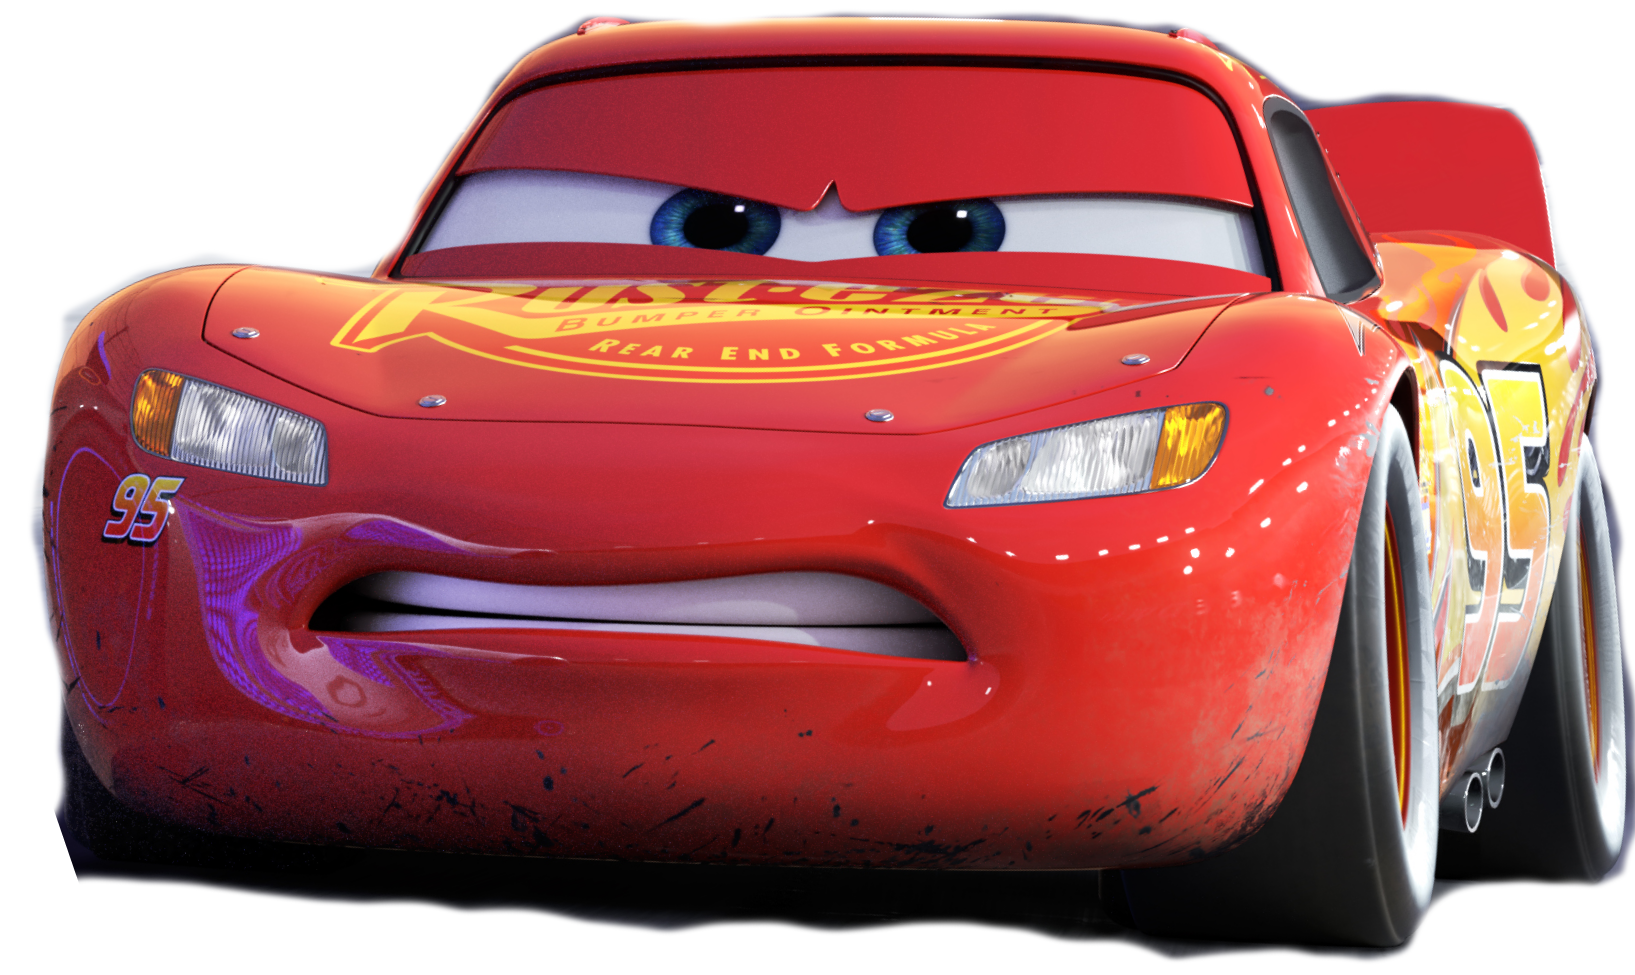 lightyear mcqueen cars 2 video game download content